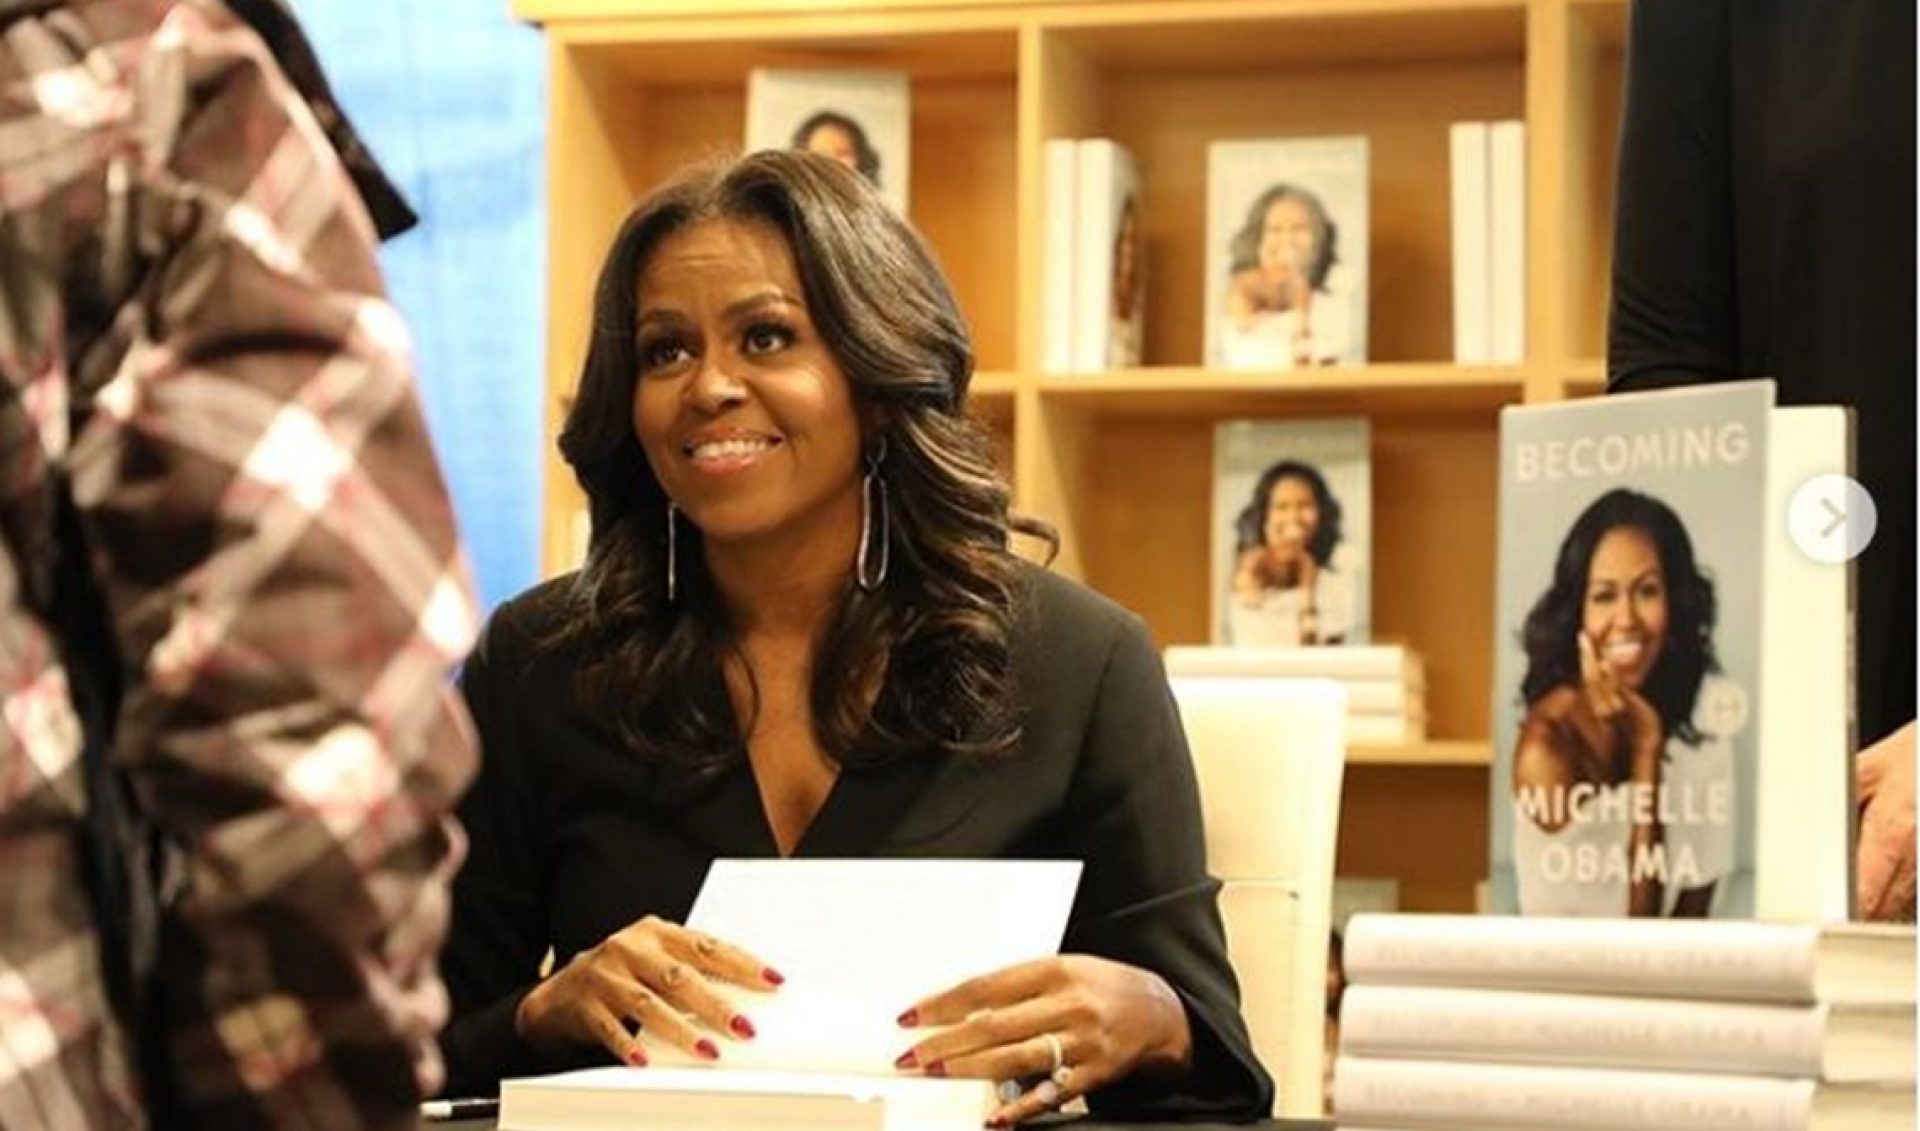 Michelle Obama To Take Questions From John Green, Jouelzy, More In ‘BookTube’ YouTube Special